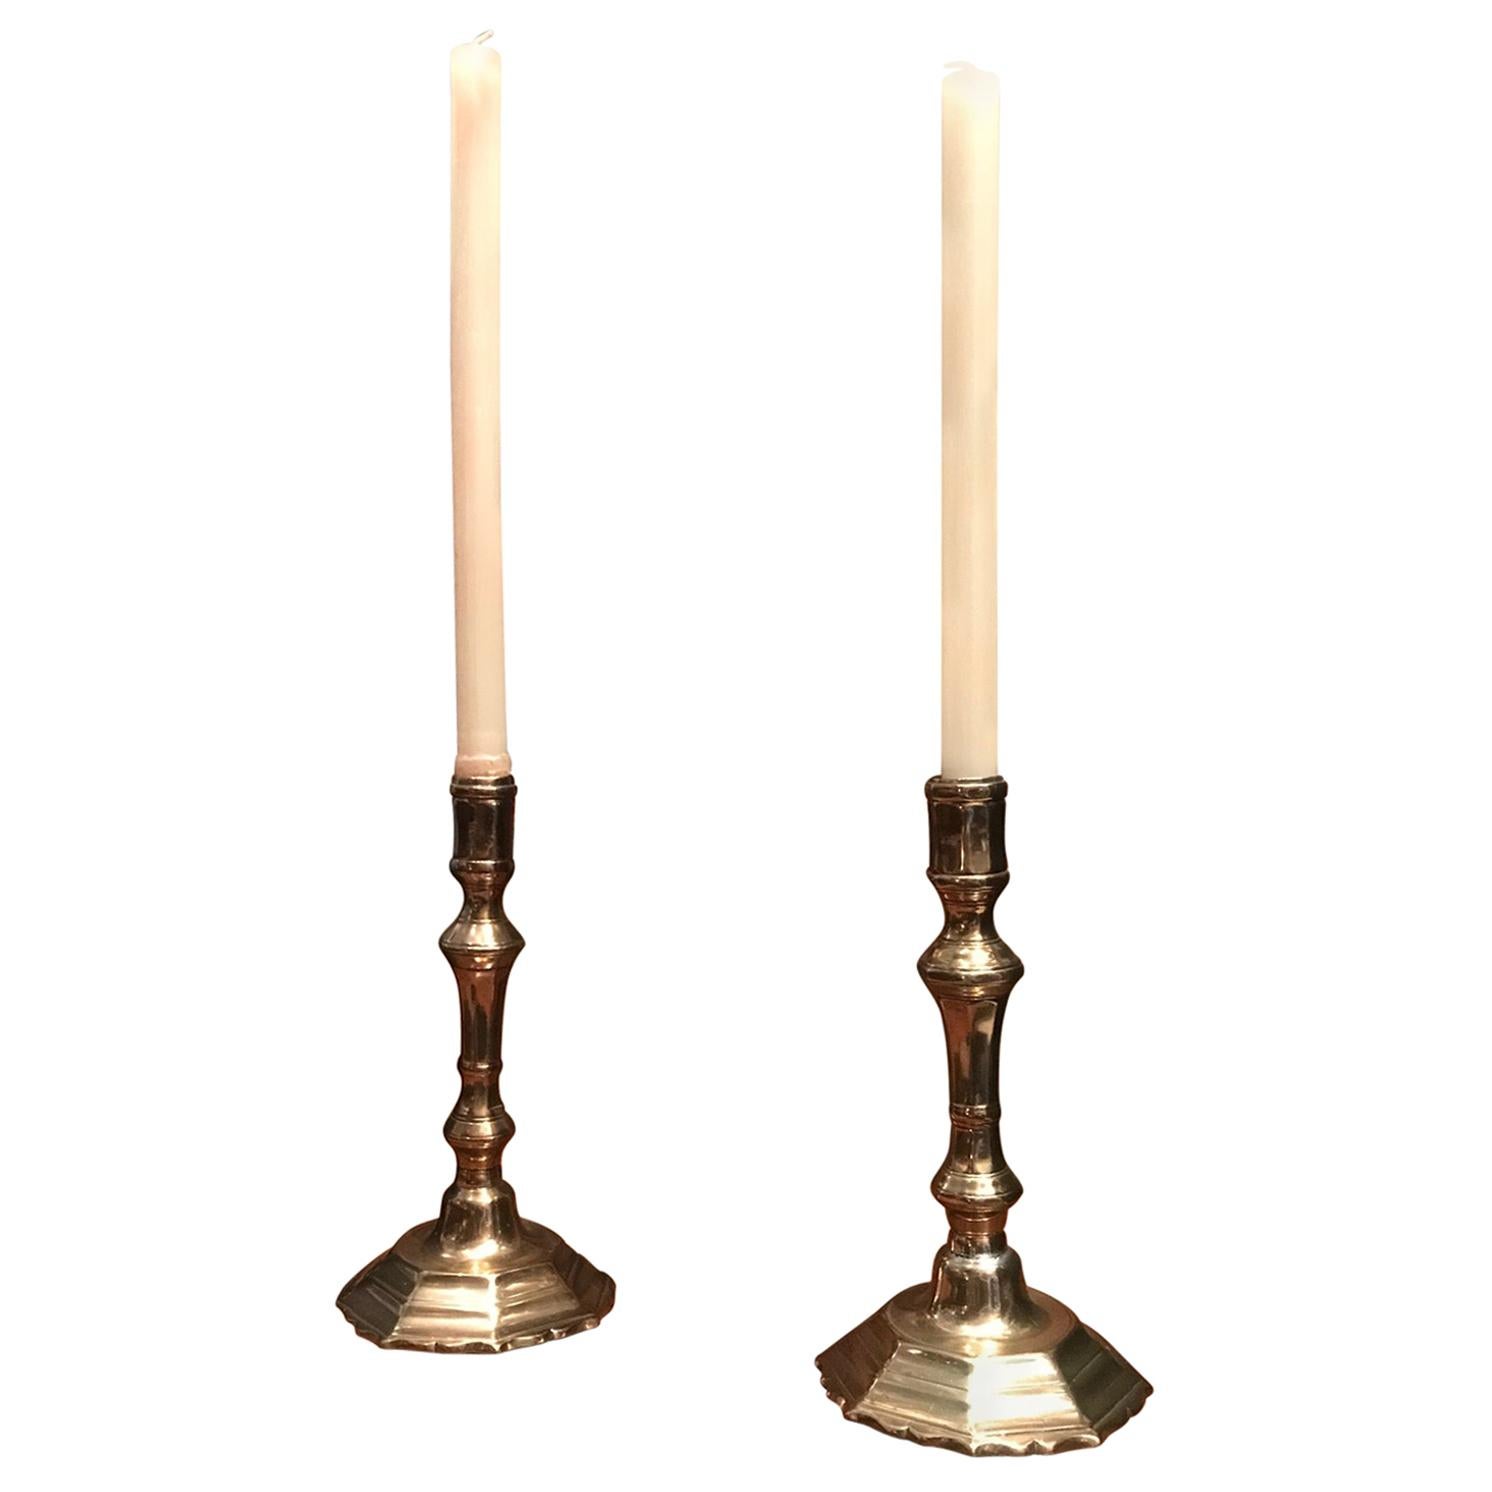 Candlesticks Candleholder Light in Brass Antique Object Decorative Accent, Pair For Sale